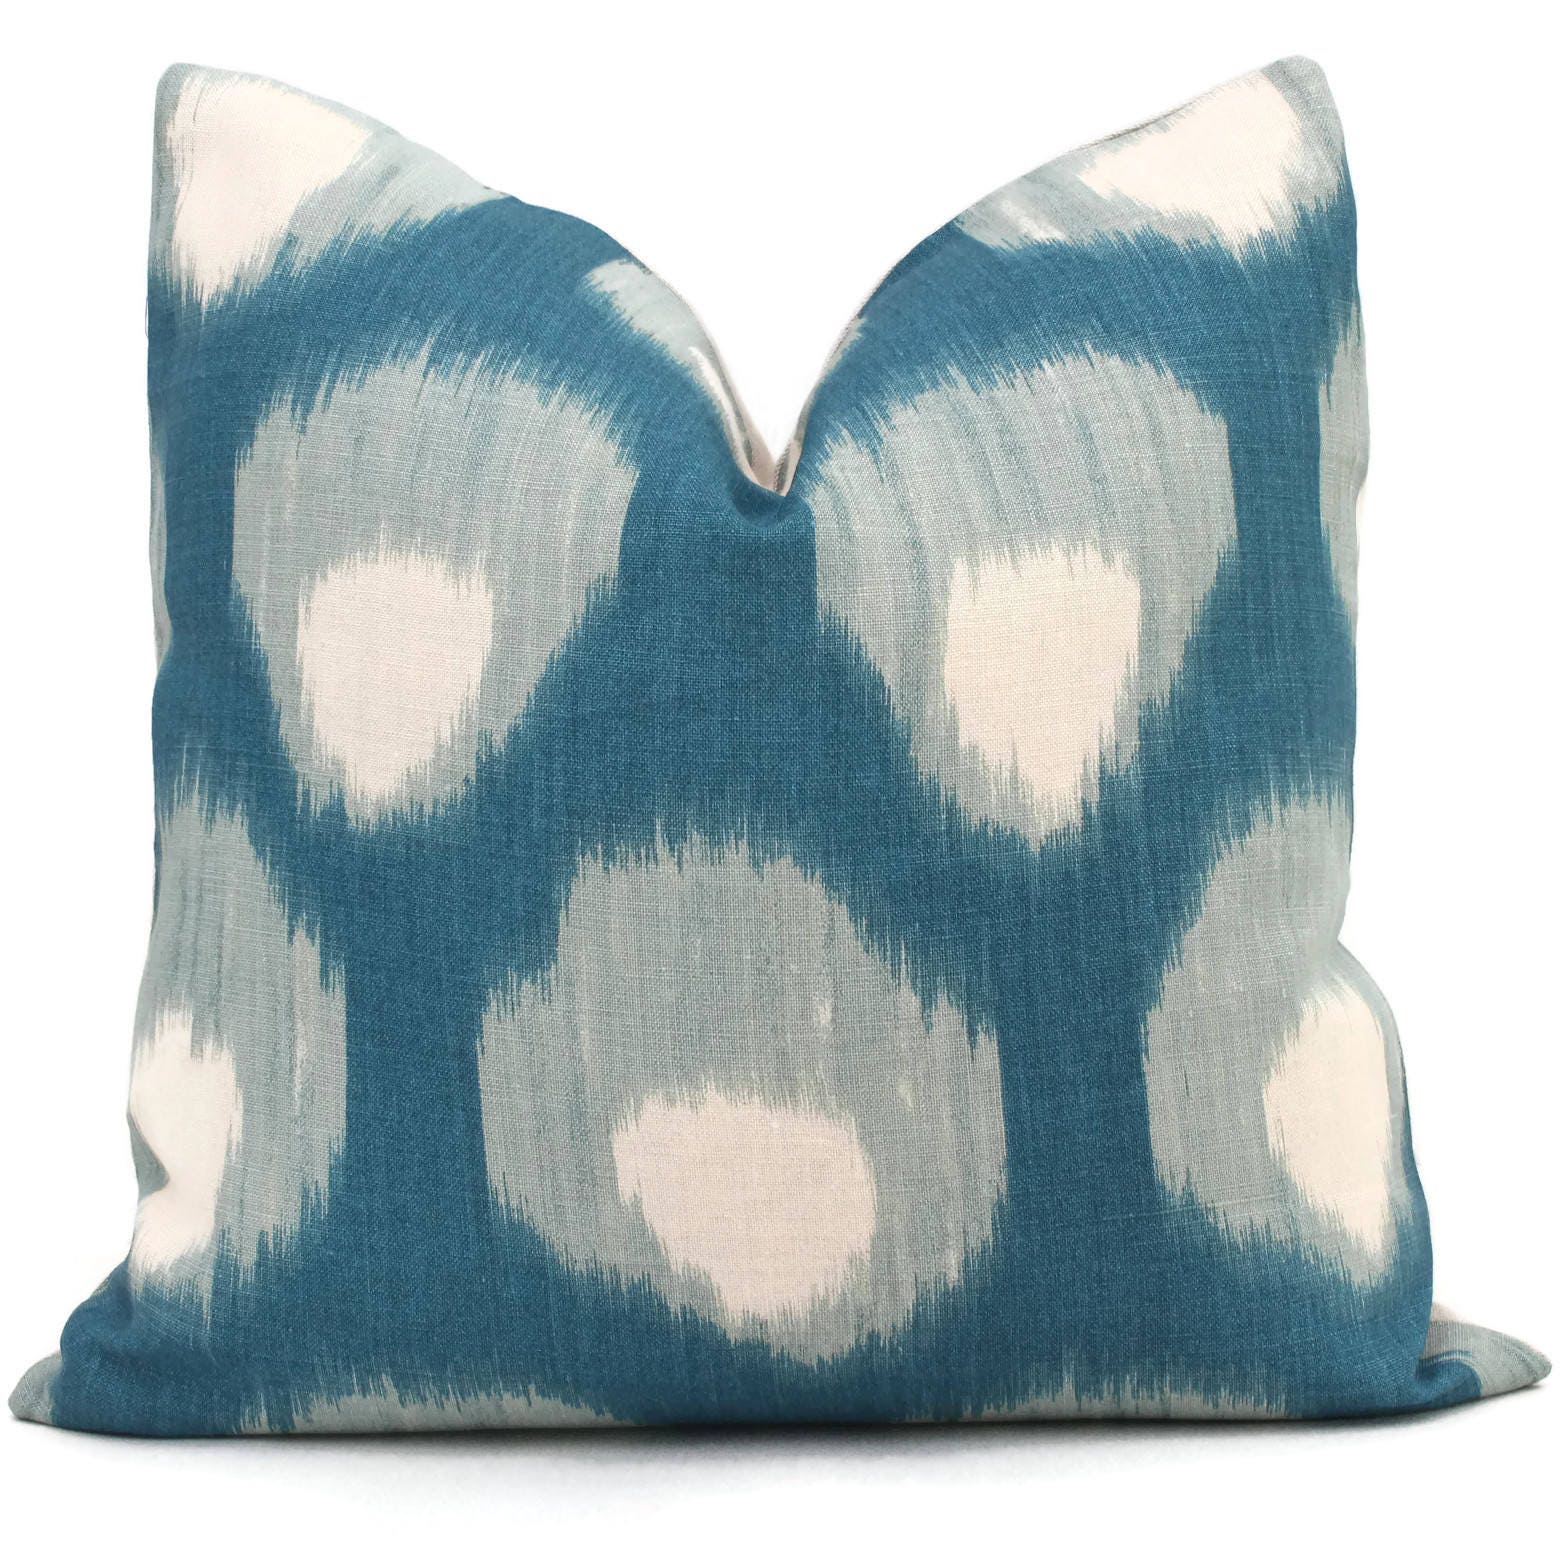 Ikat Stripe In Indigo-High End Designer Decorative Pillow Cover-Peter Dunham-Accent Pillow-Single Sided